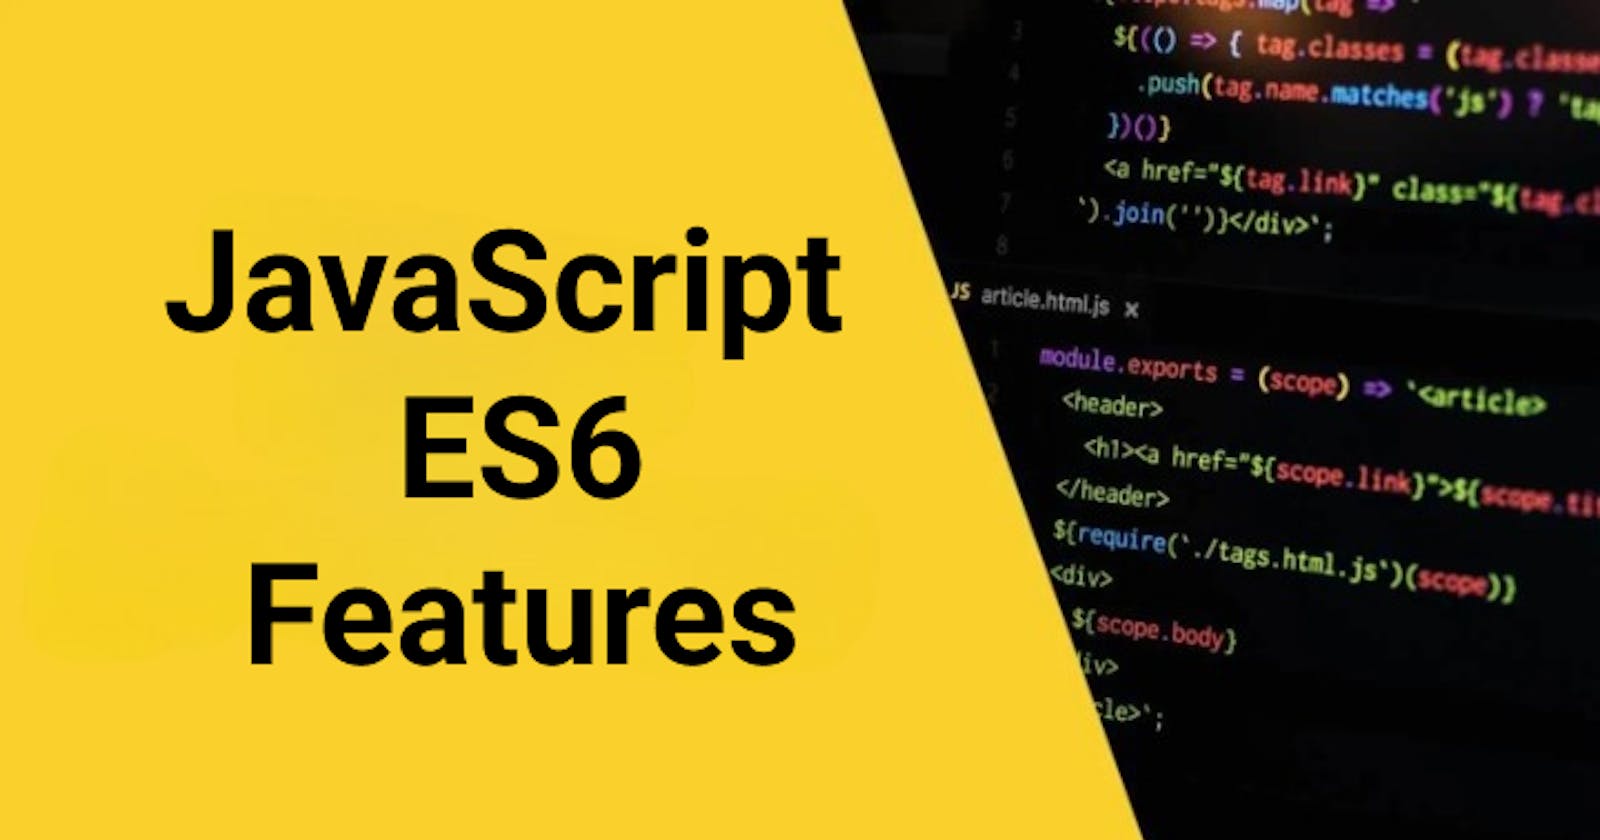 JavaScript ES6 Features for your Next Project